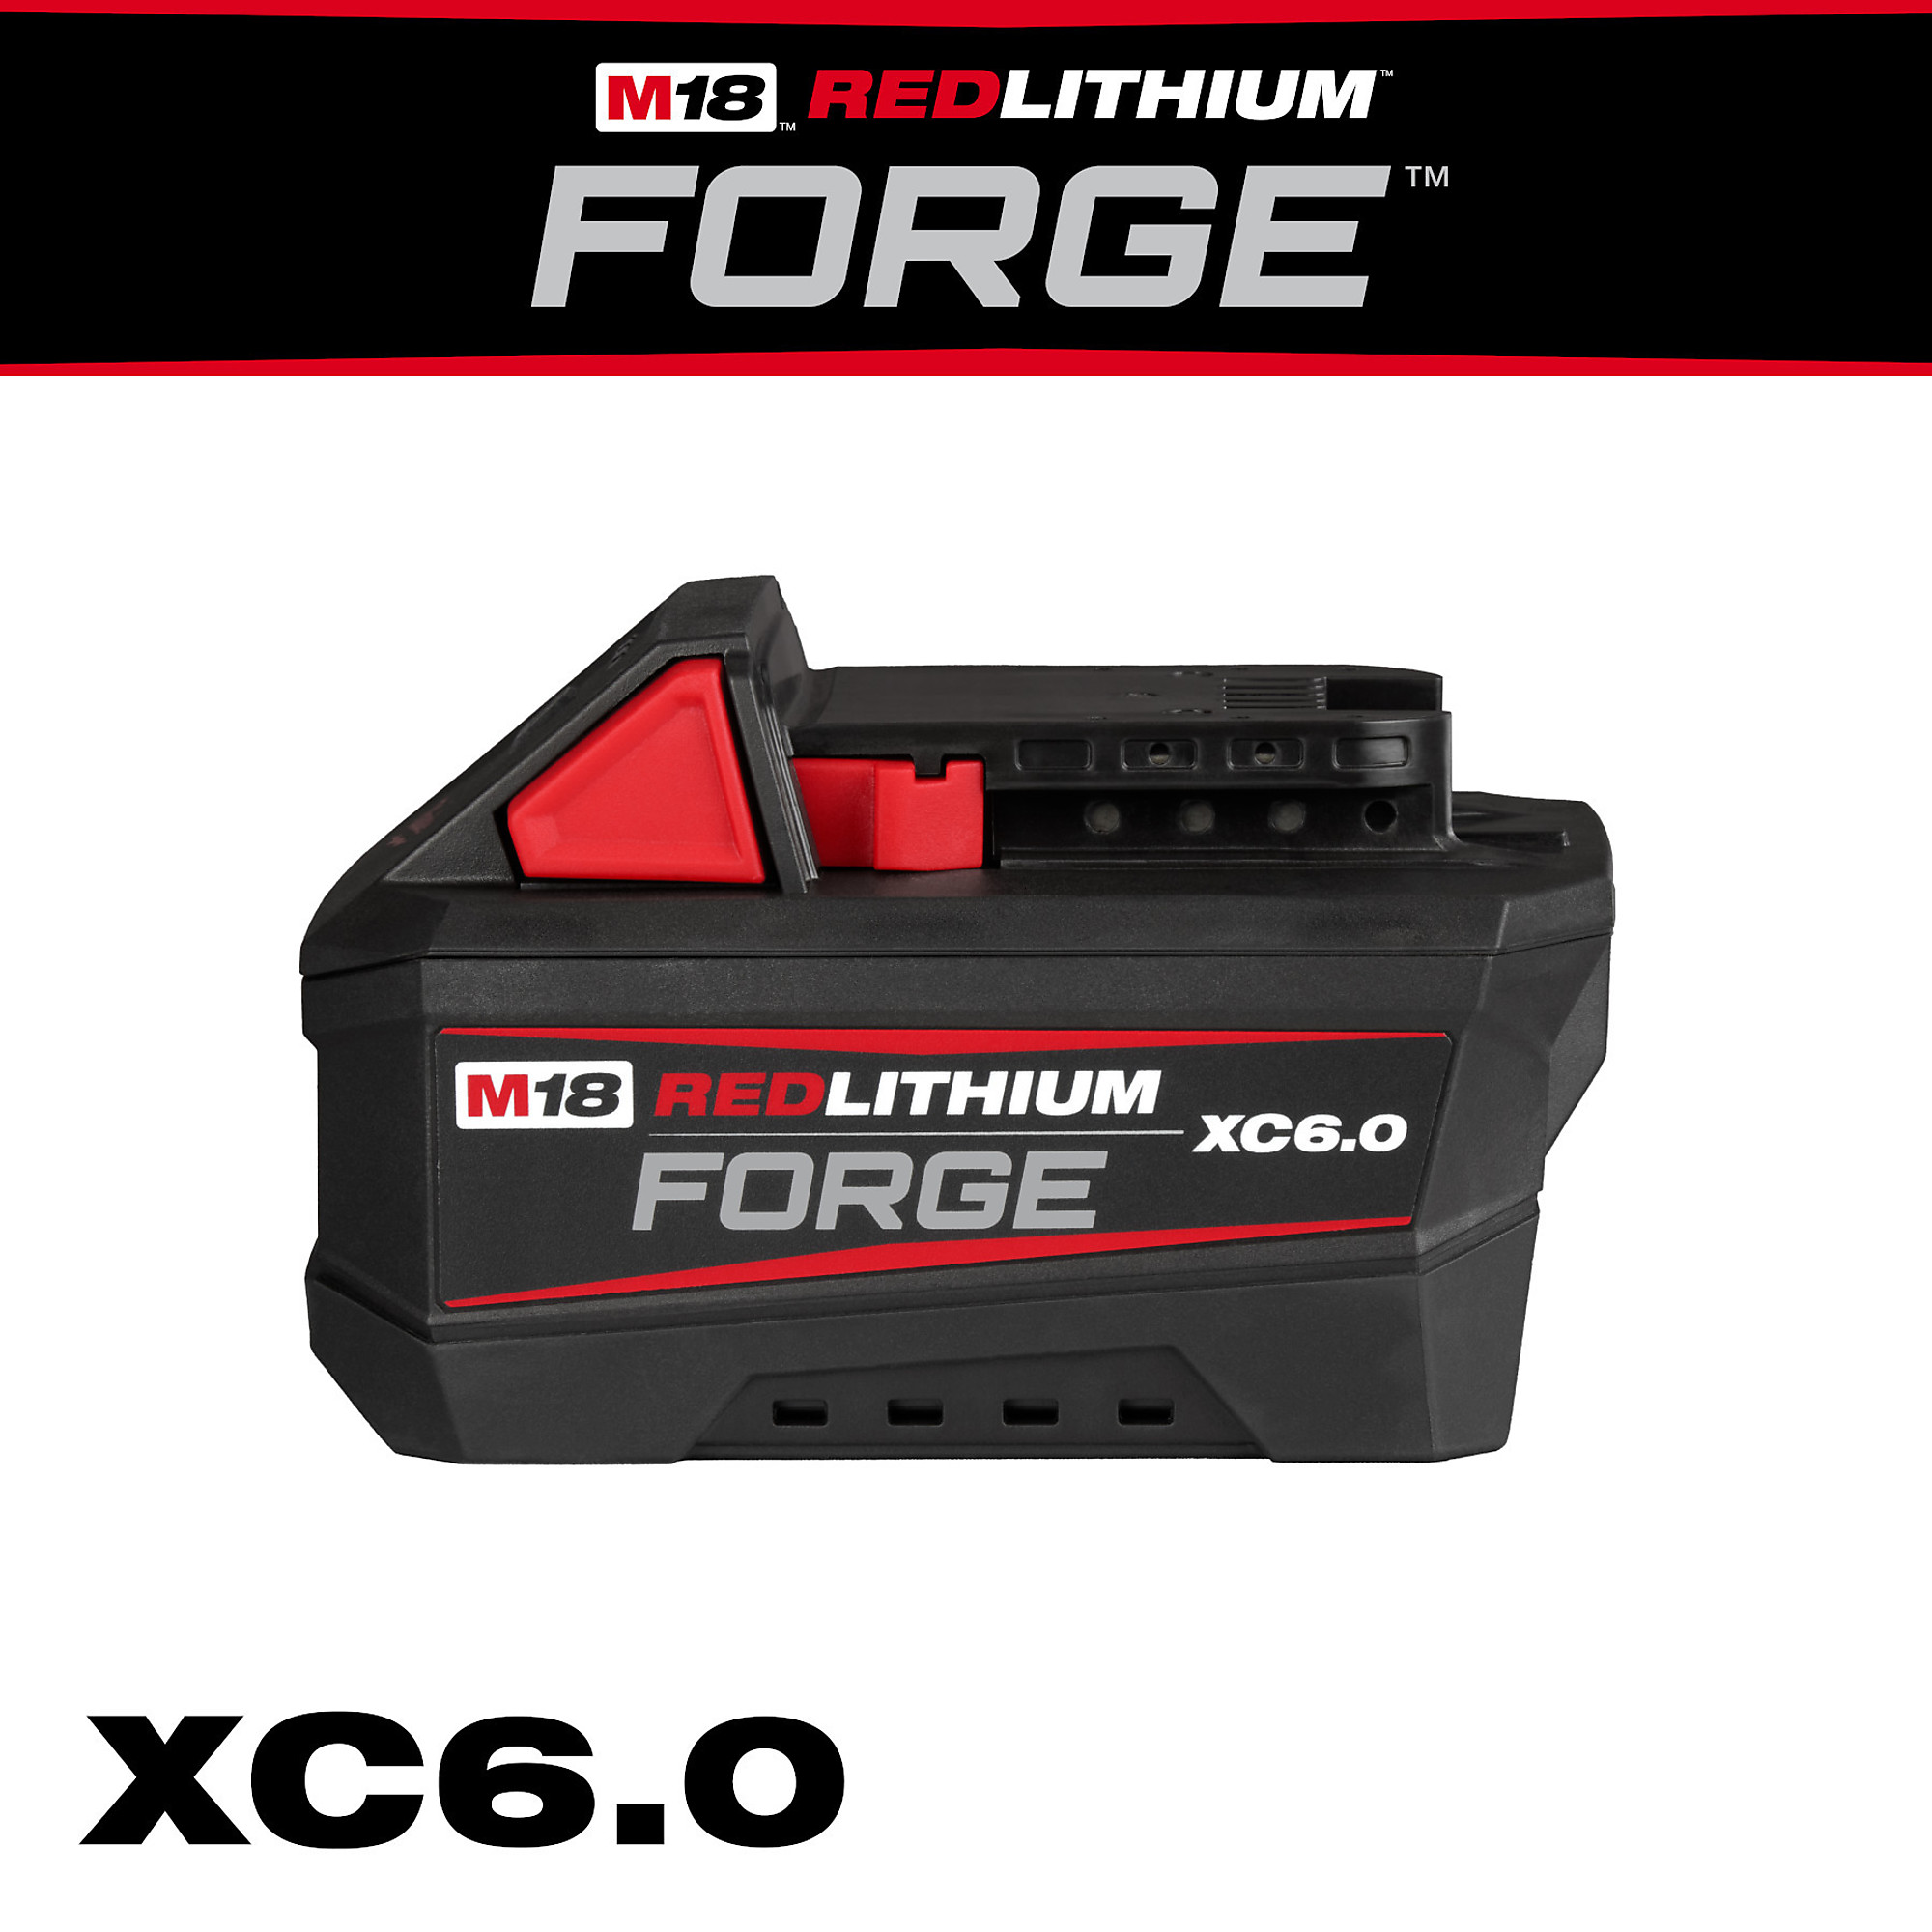 Milwaukee M18 REDLITHIUM FORGE , M18 REDLITHIUM FORGE XC6.0 Volts 18 Battery Type Lithium-ion, Batteries (qty.) 1 Model 48-11-1861